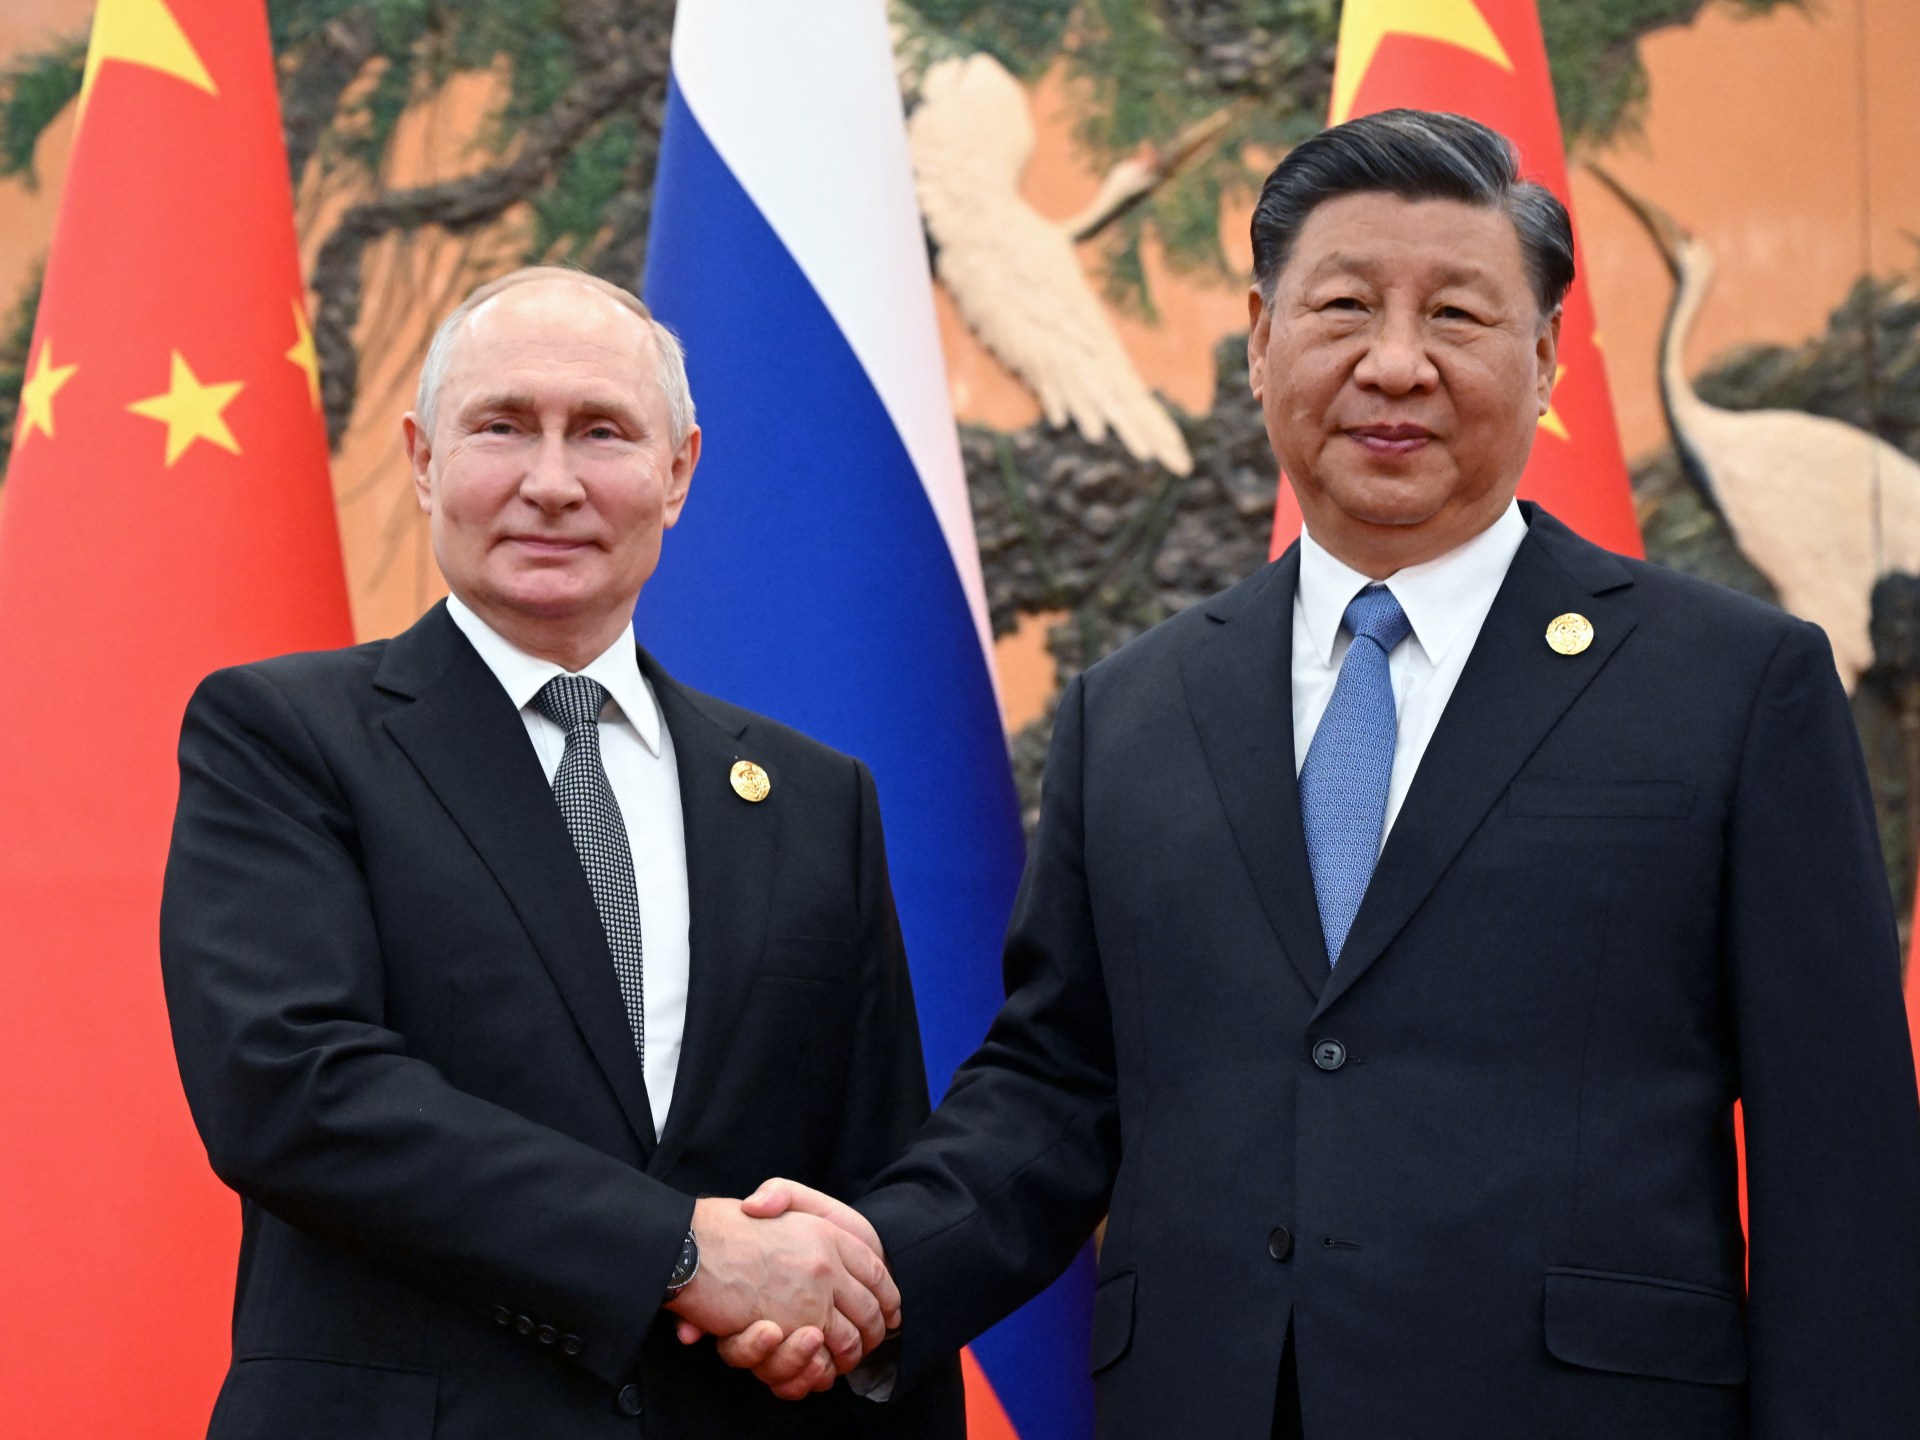 China lauds Russia relations and calls for strengthened Asia-Pacific role | Russia-Ukraine war News